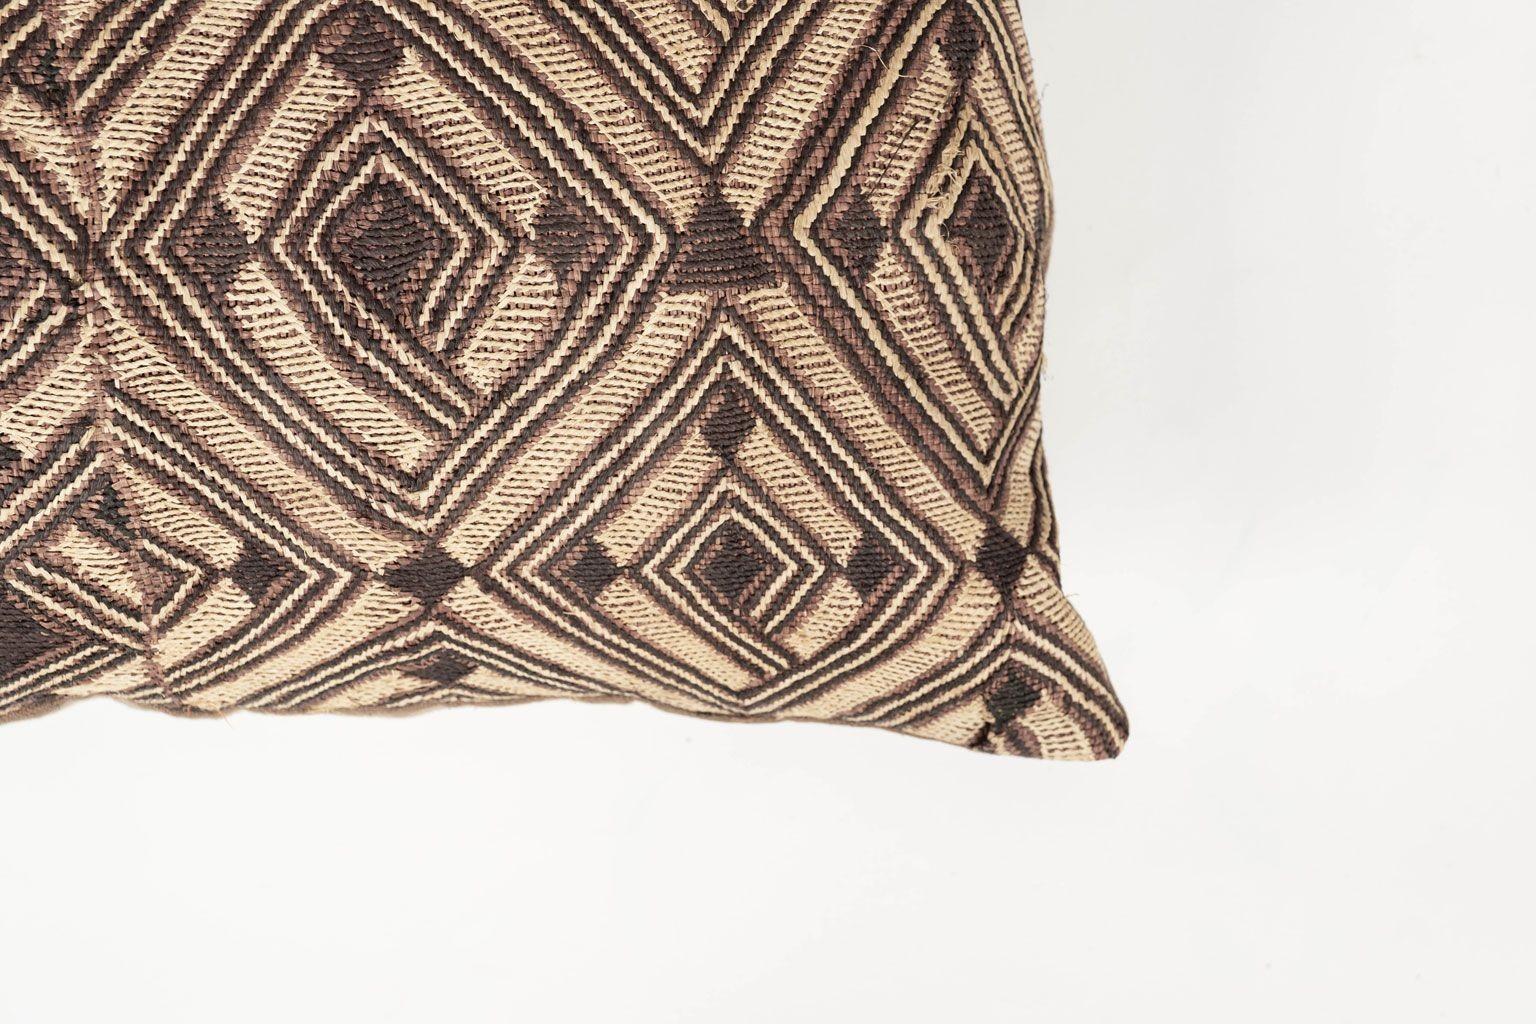 Large custom cushion from vintage African Kuba cloth. Hand-dyed and woven raphia palm with cut pile to resemble velvet. Backed with brown linen. Includes zip fastener and feather insert.